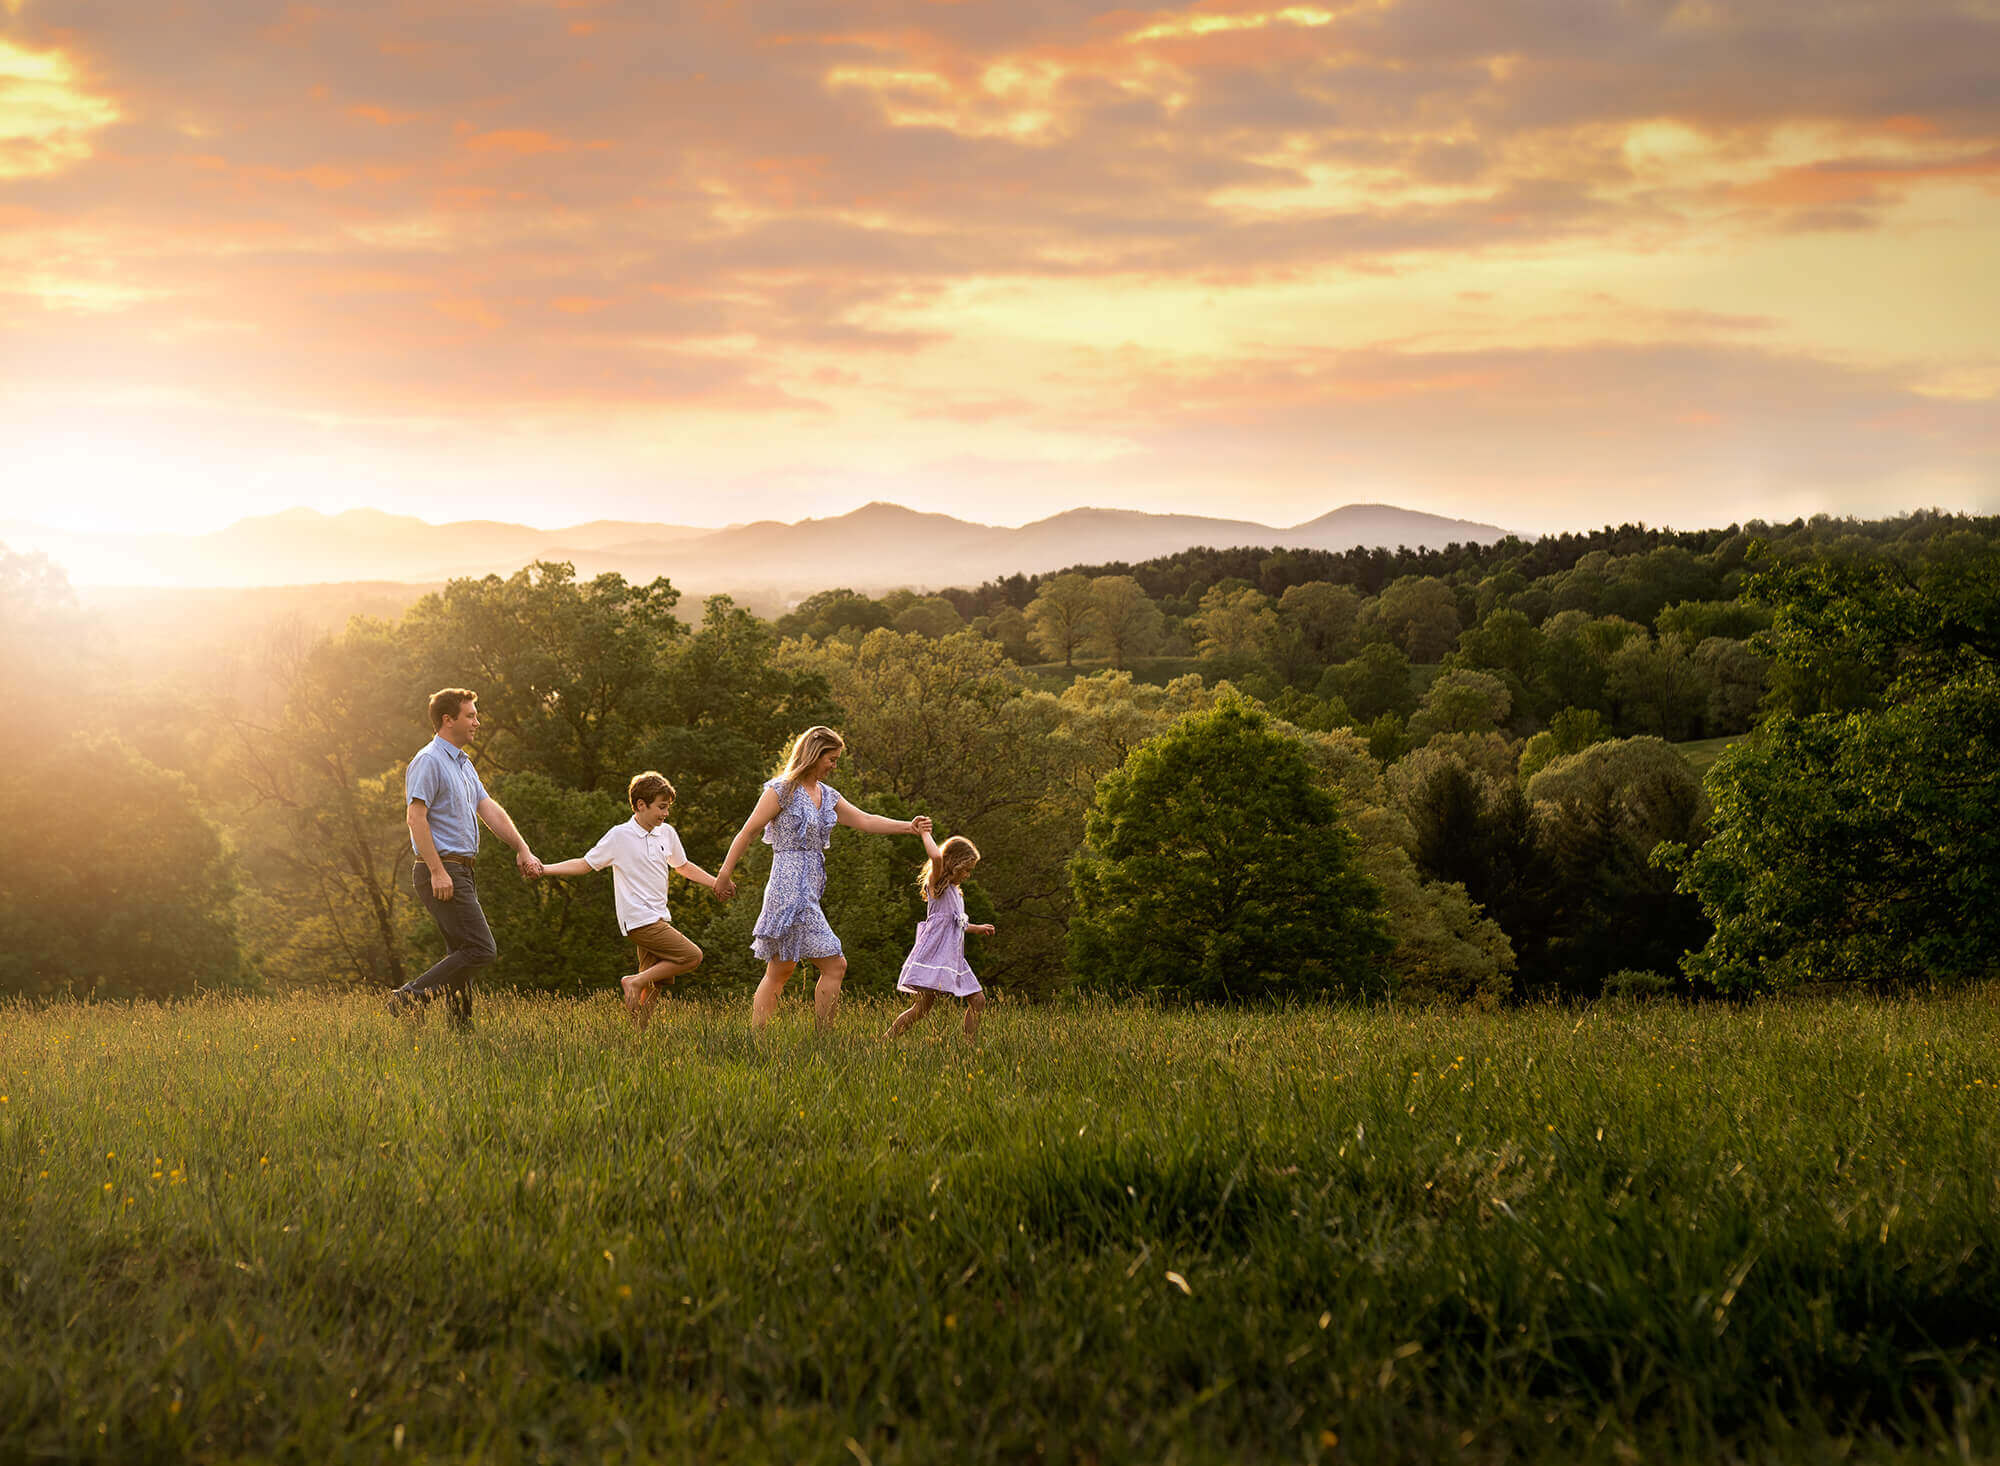 A family walking through a field in front of the mountains at sunset.